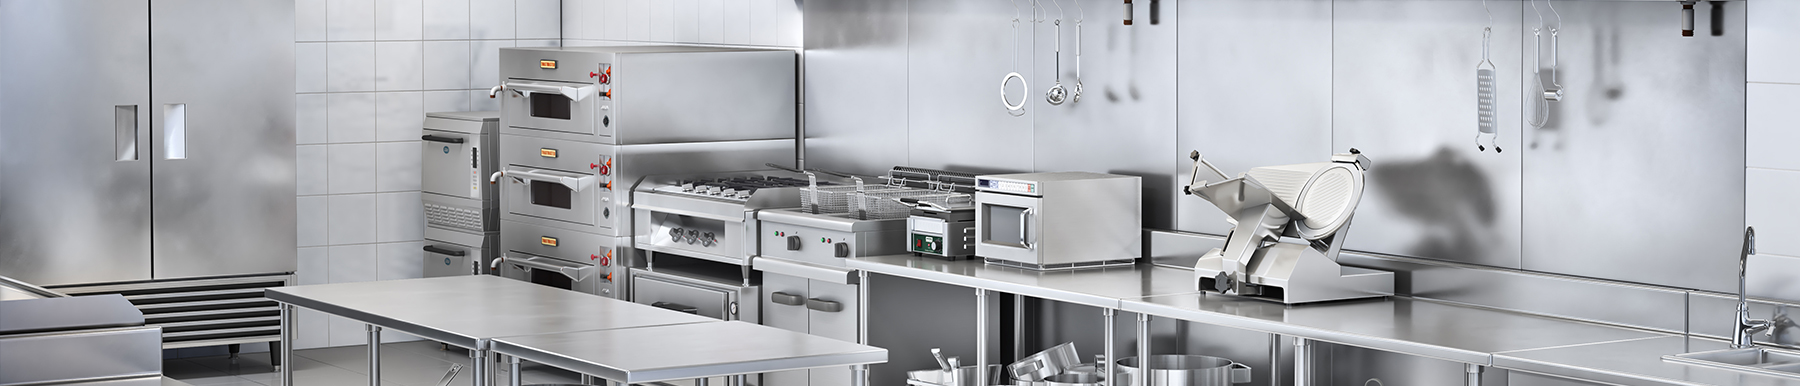 Catering Equipment Suppliers Near Vale of White Horse | H2 Catering Equipment Catering Equipment